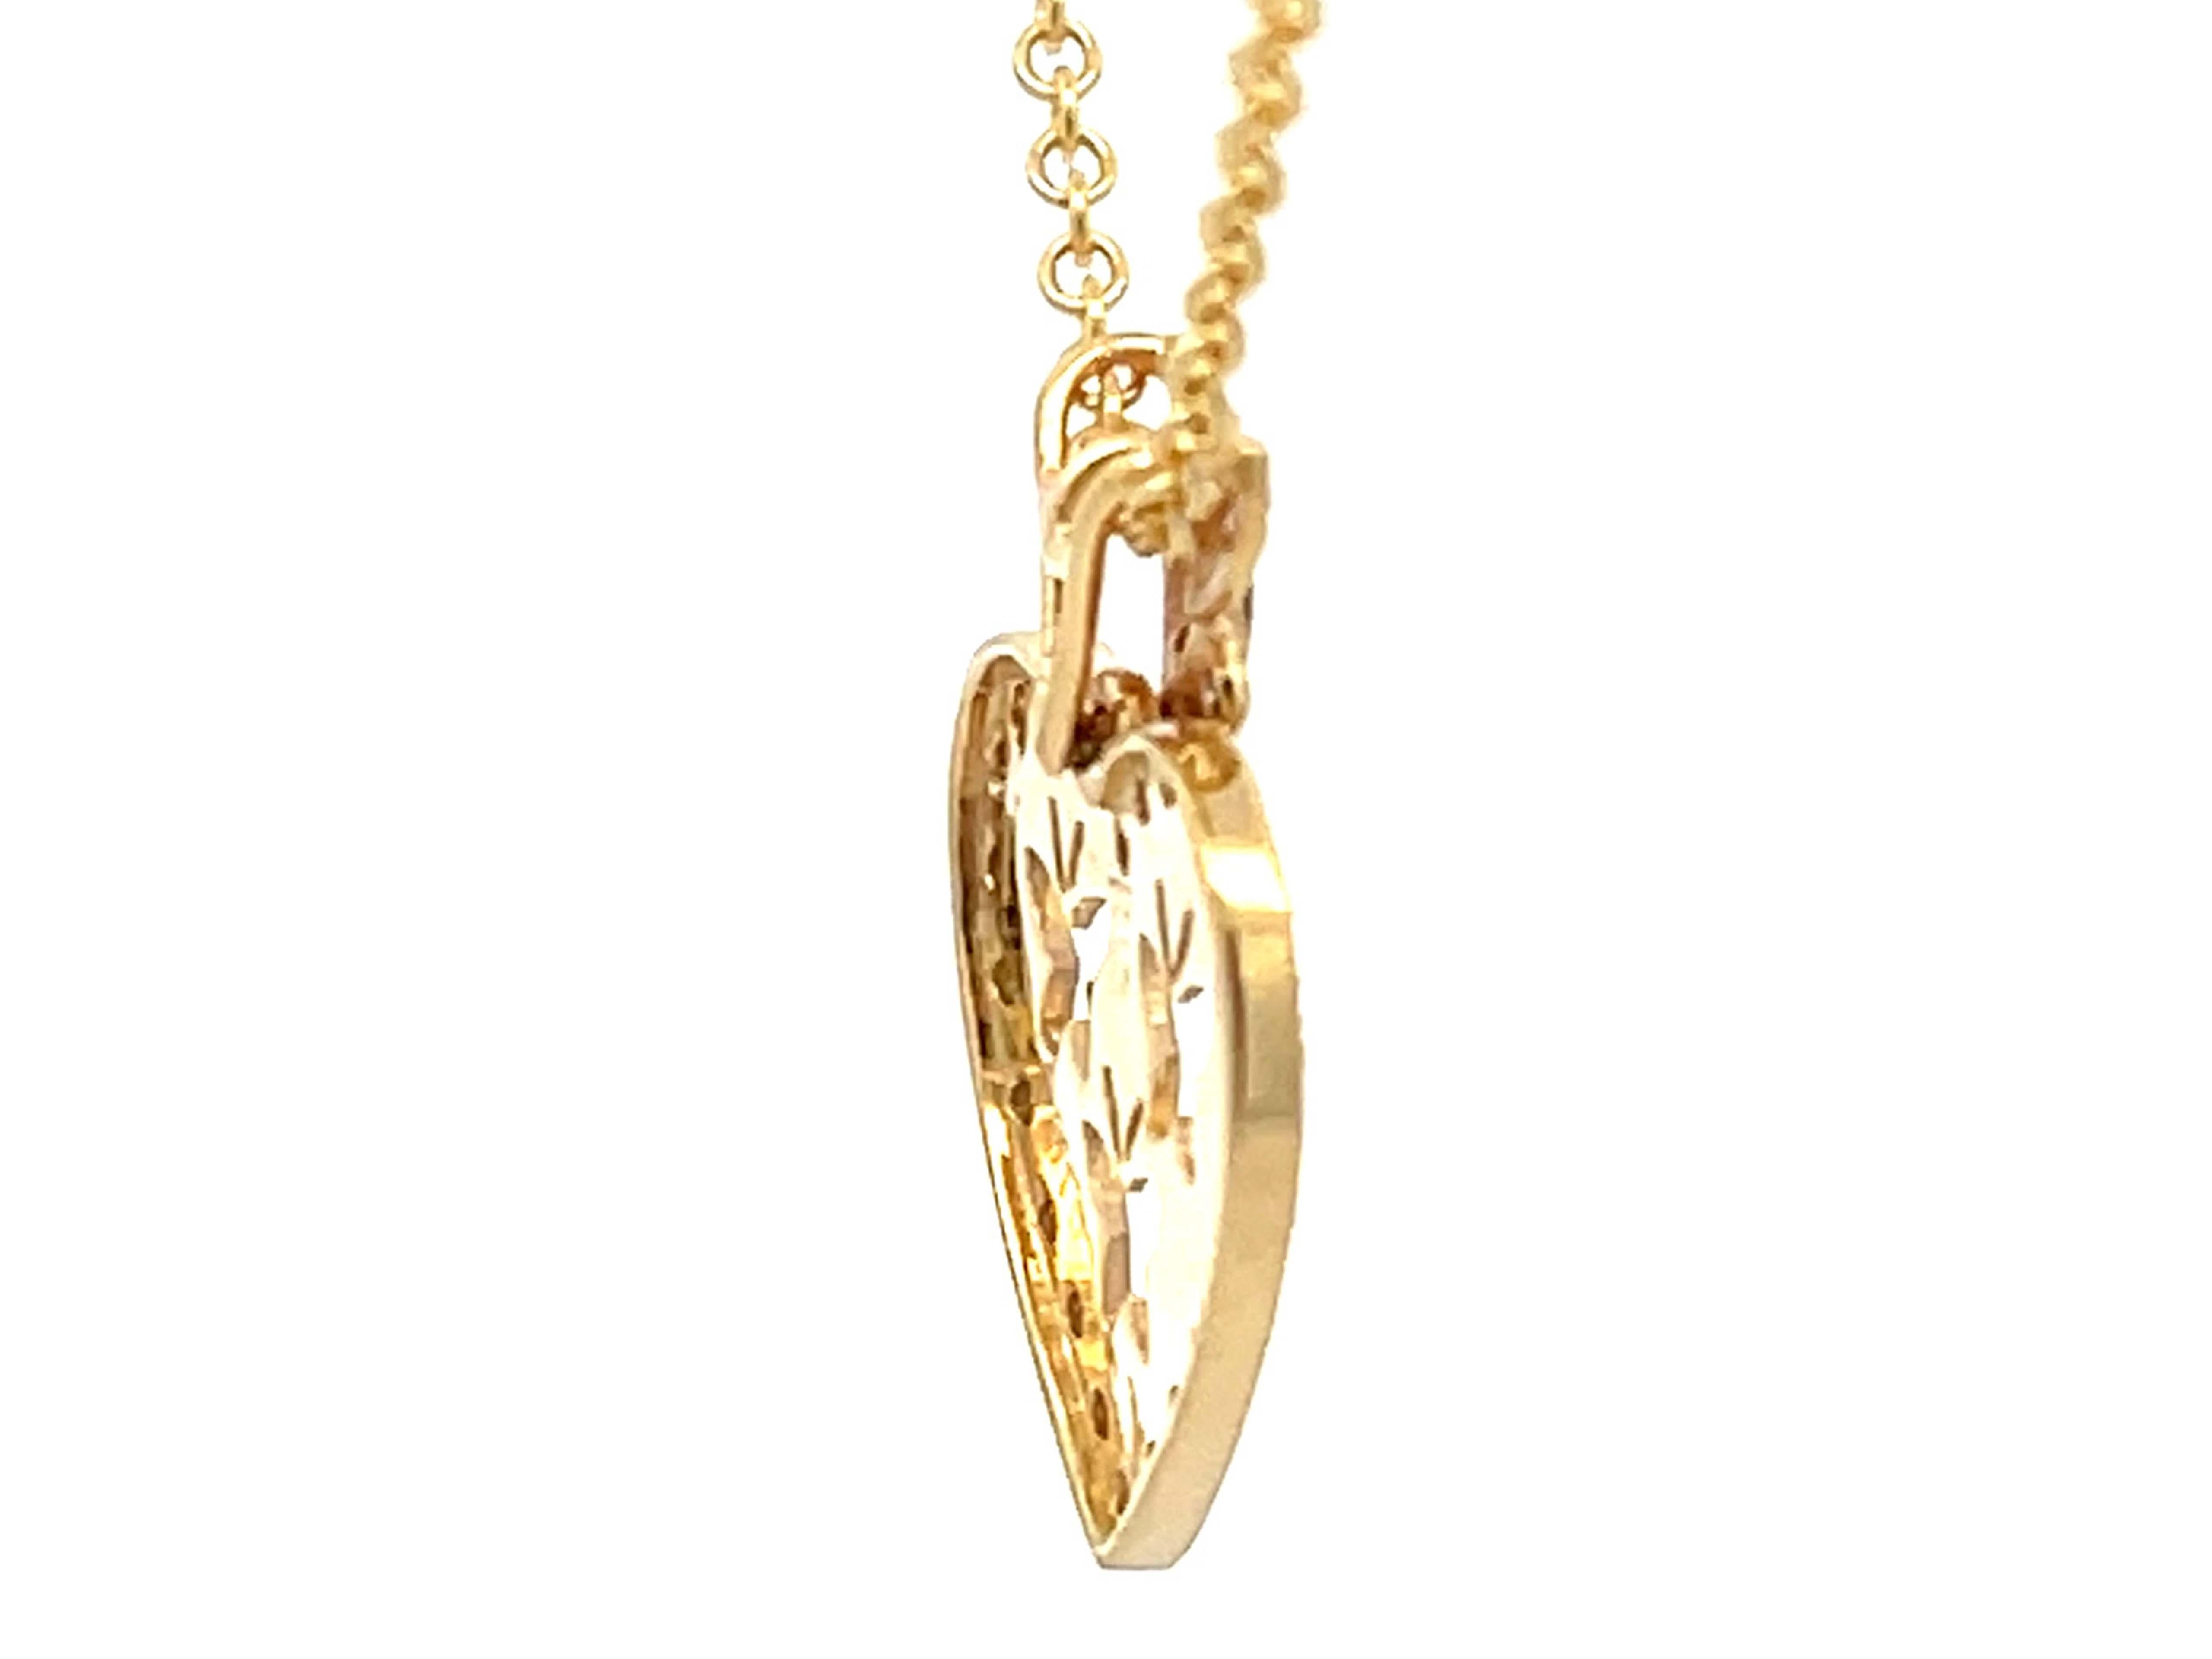 Diamond Butterfly Heart Necklace in 18k Yellow Gold In Excellent Condition For Sale In Honolulu, HI